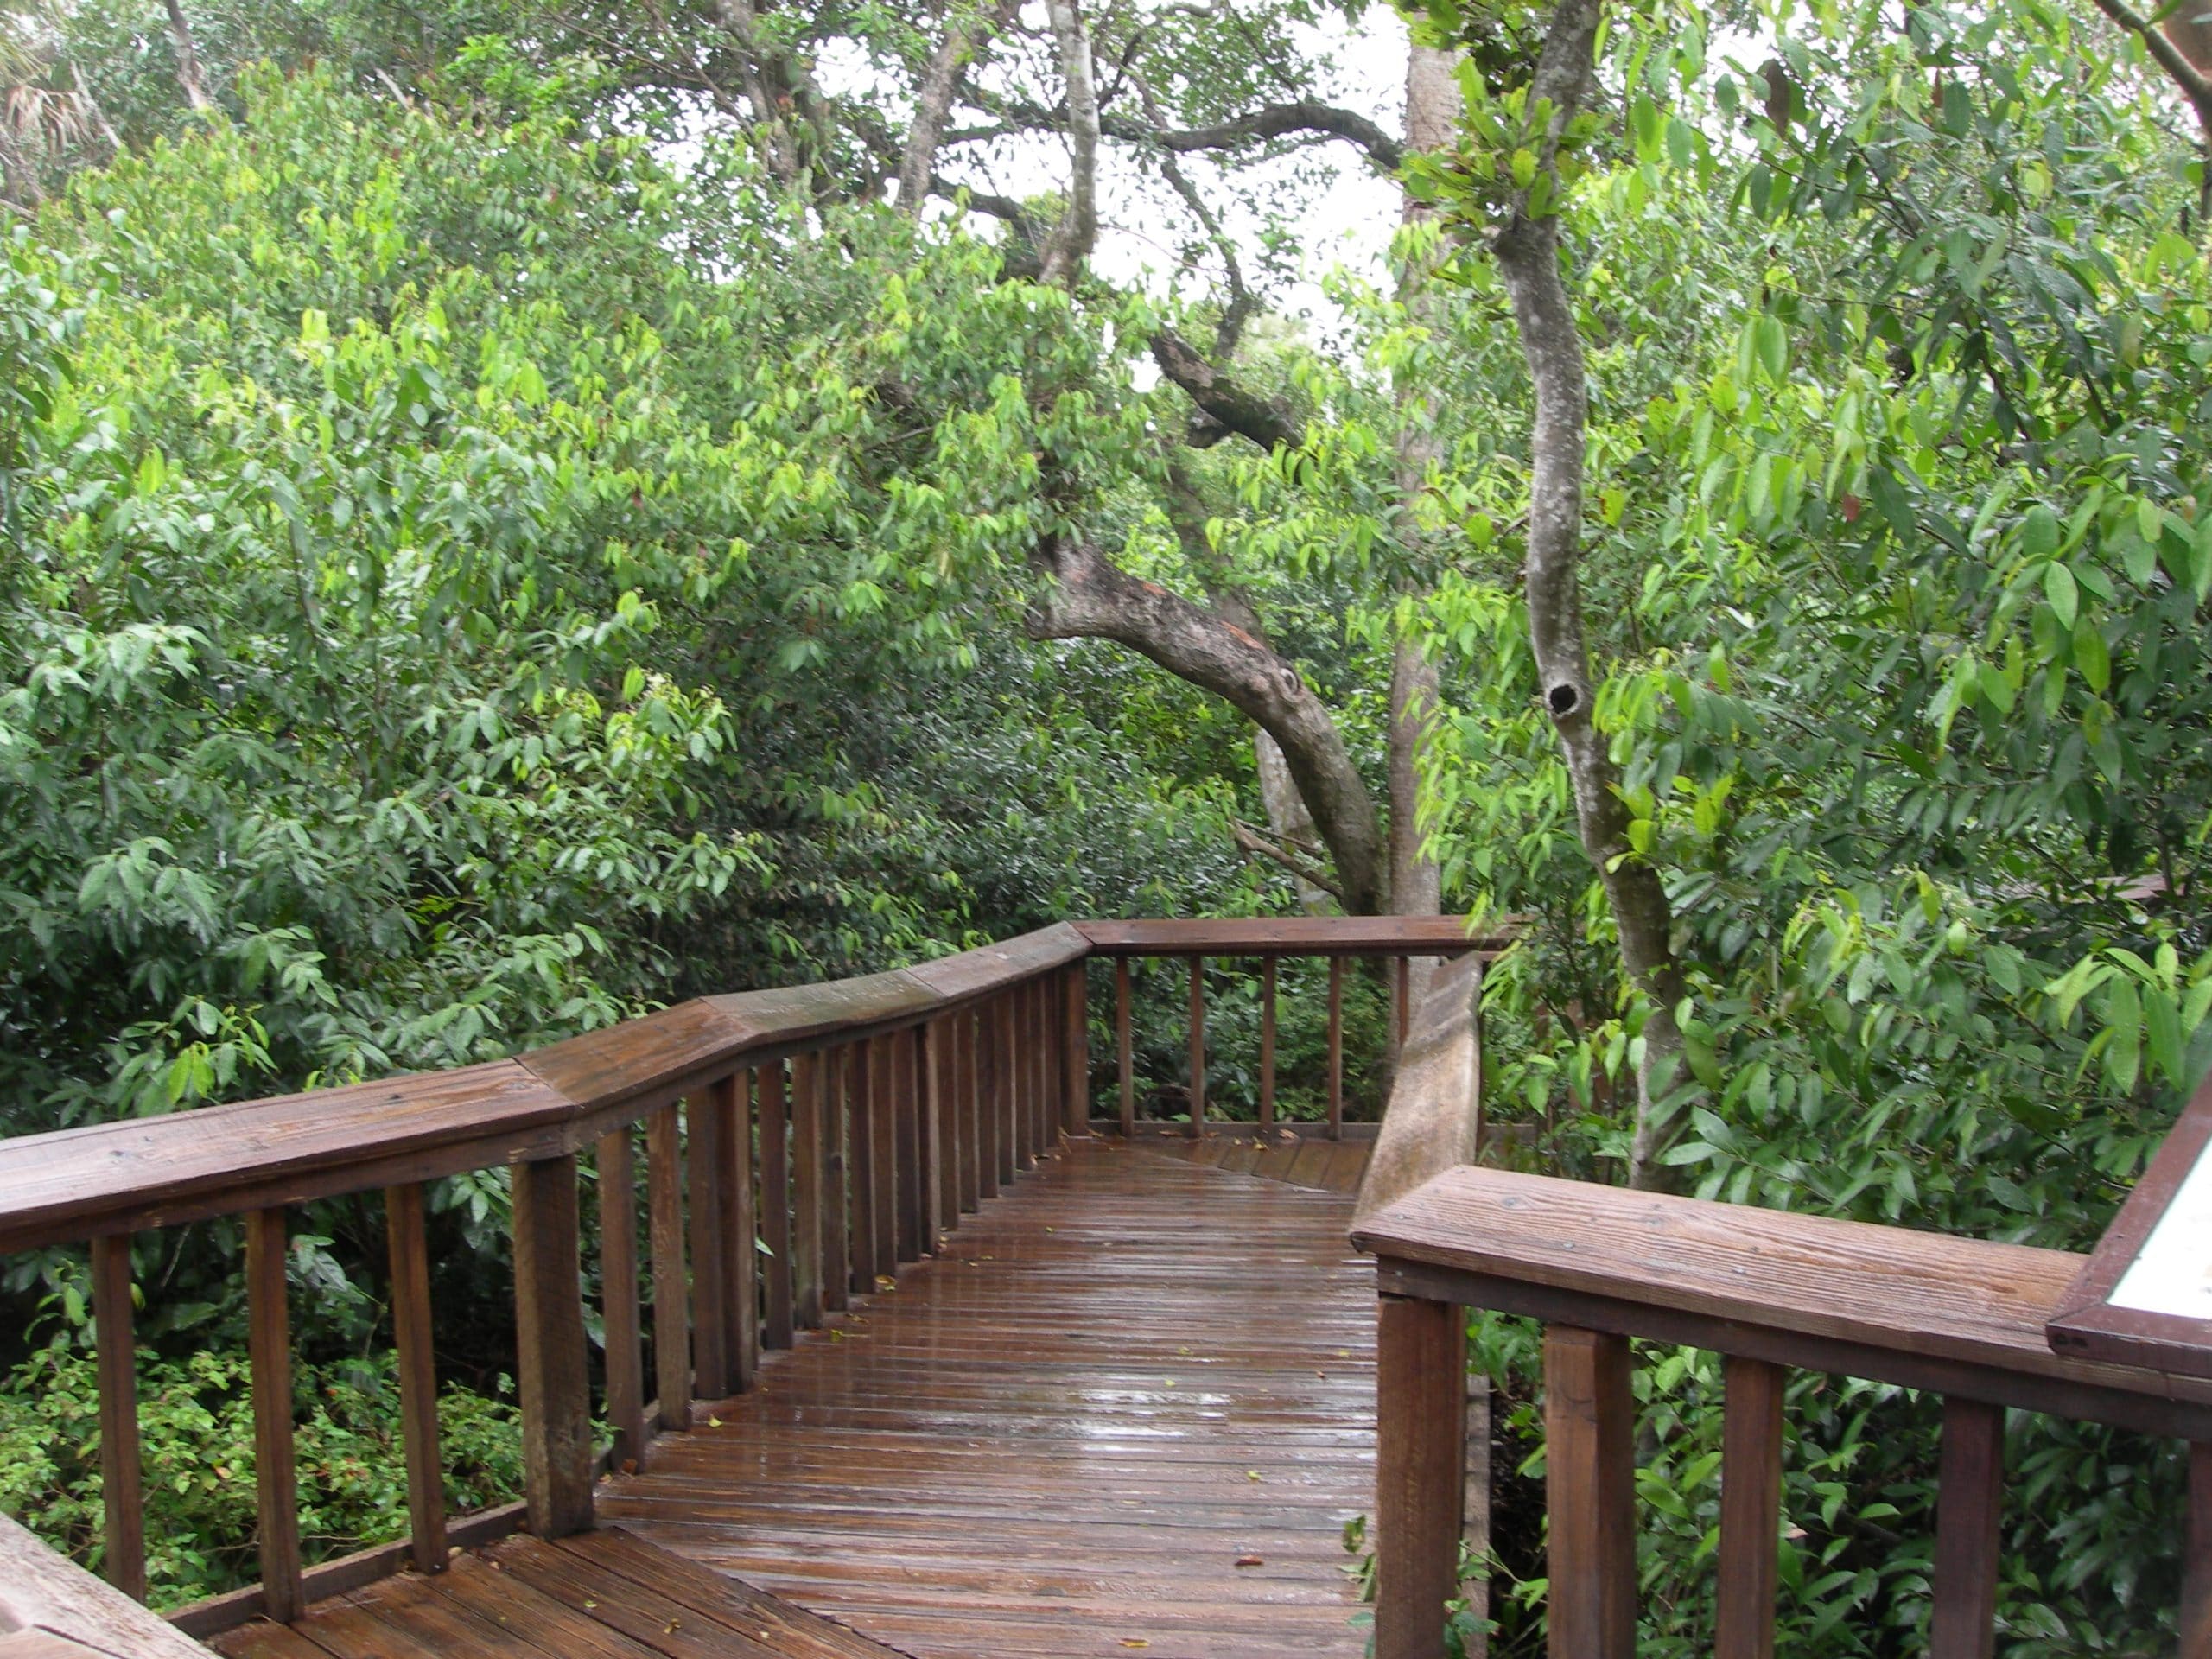 plank trail at the Gumbo Limbo Nature Center